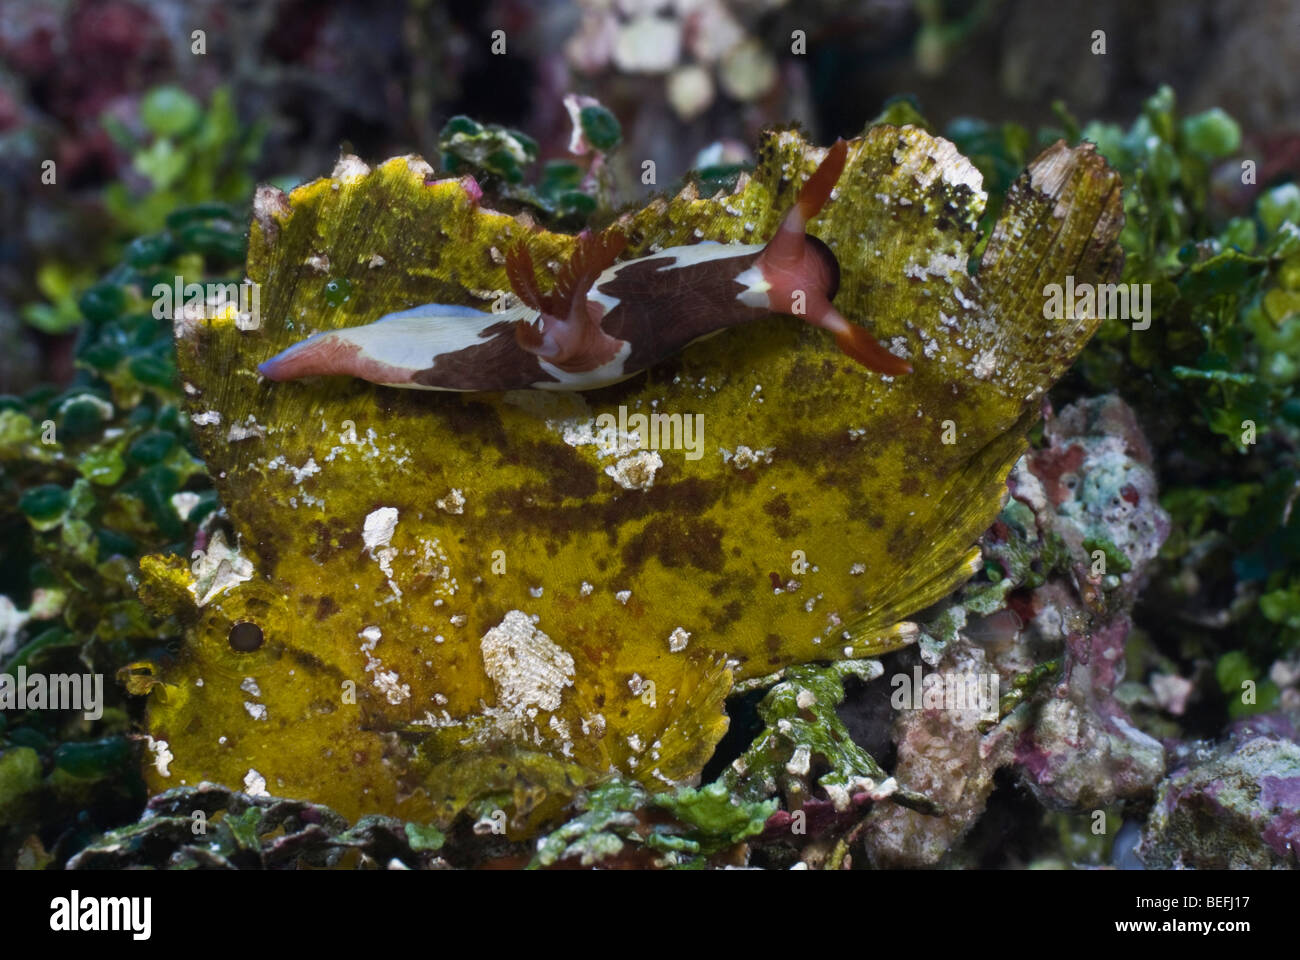 Nudibranch climbing on a leaffish under water. Stock Photo